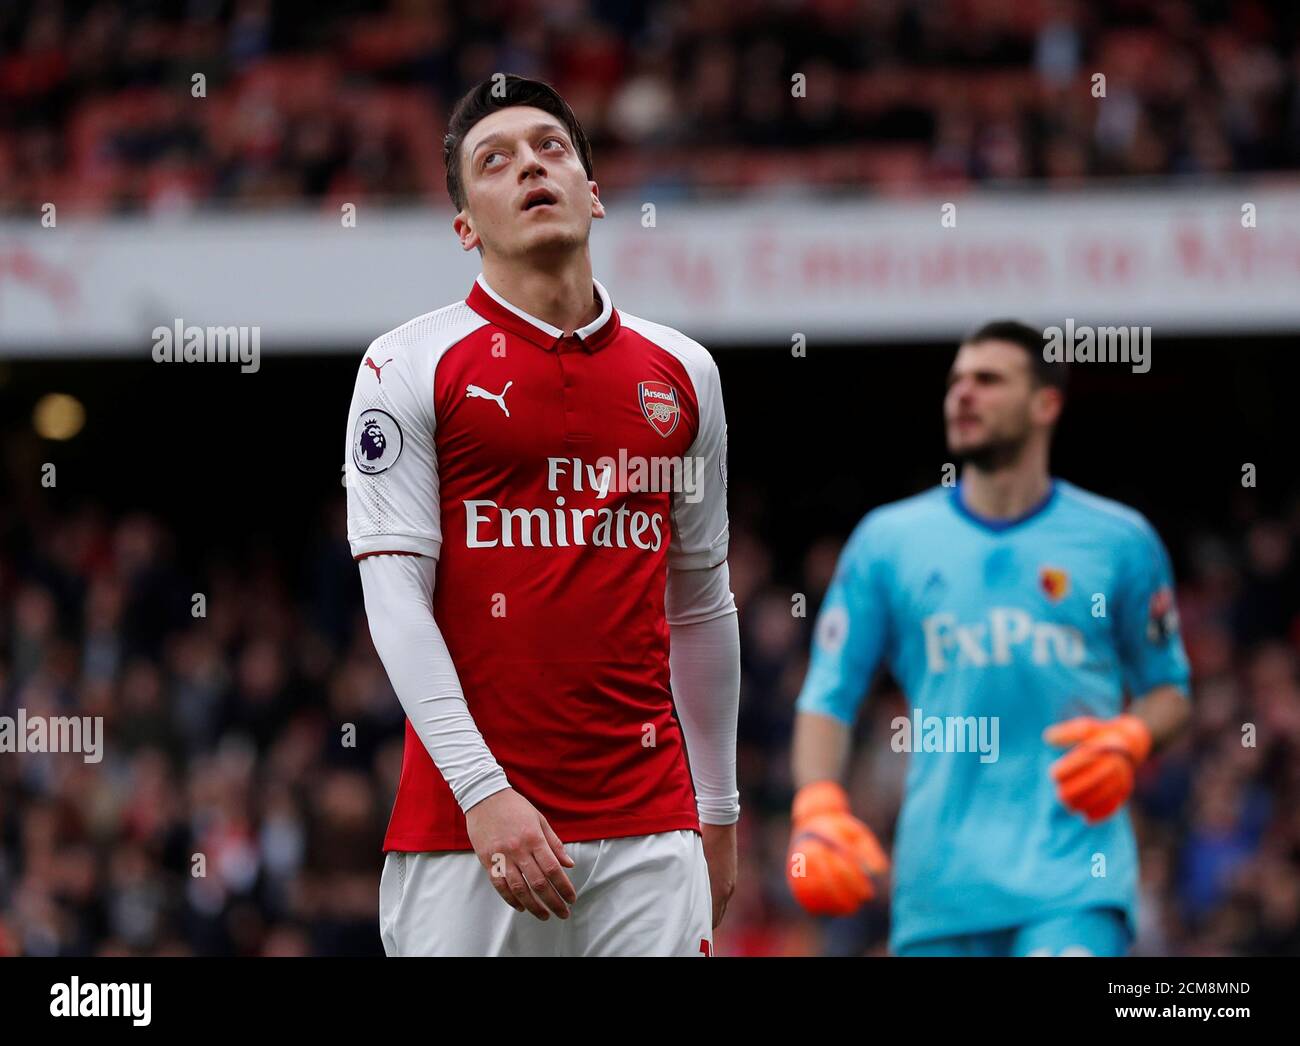 Soccer Football - Premier League - Arsenal vs Watford - Emirates Stadium, London, Britain - March 11, 2018   Arsenal's Mesut Ozil reacts after missing a chance to score               REUTERS/Eddie Keogh    EDITORIAL USE ONLY. No use with unauthorized audio, video, data, fixture lists, club/league logos or 'live' services. Online in-match use limited to 75 images, no video emulation. No use in betting, games or single club/league/player publications.  Please contact your account representative for further details. Stock Photo